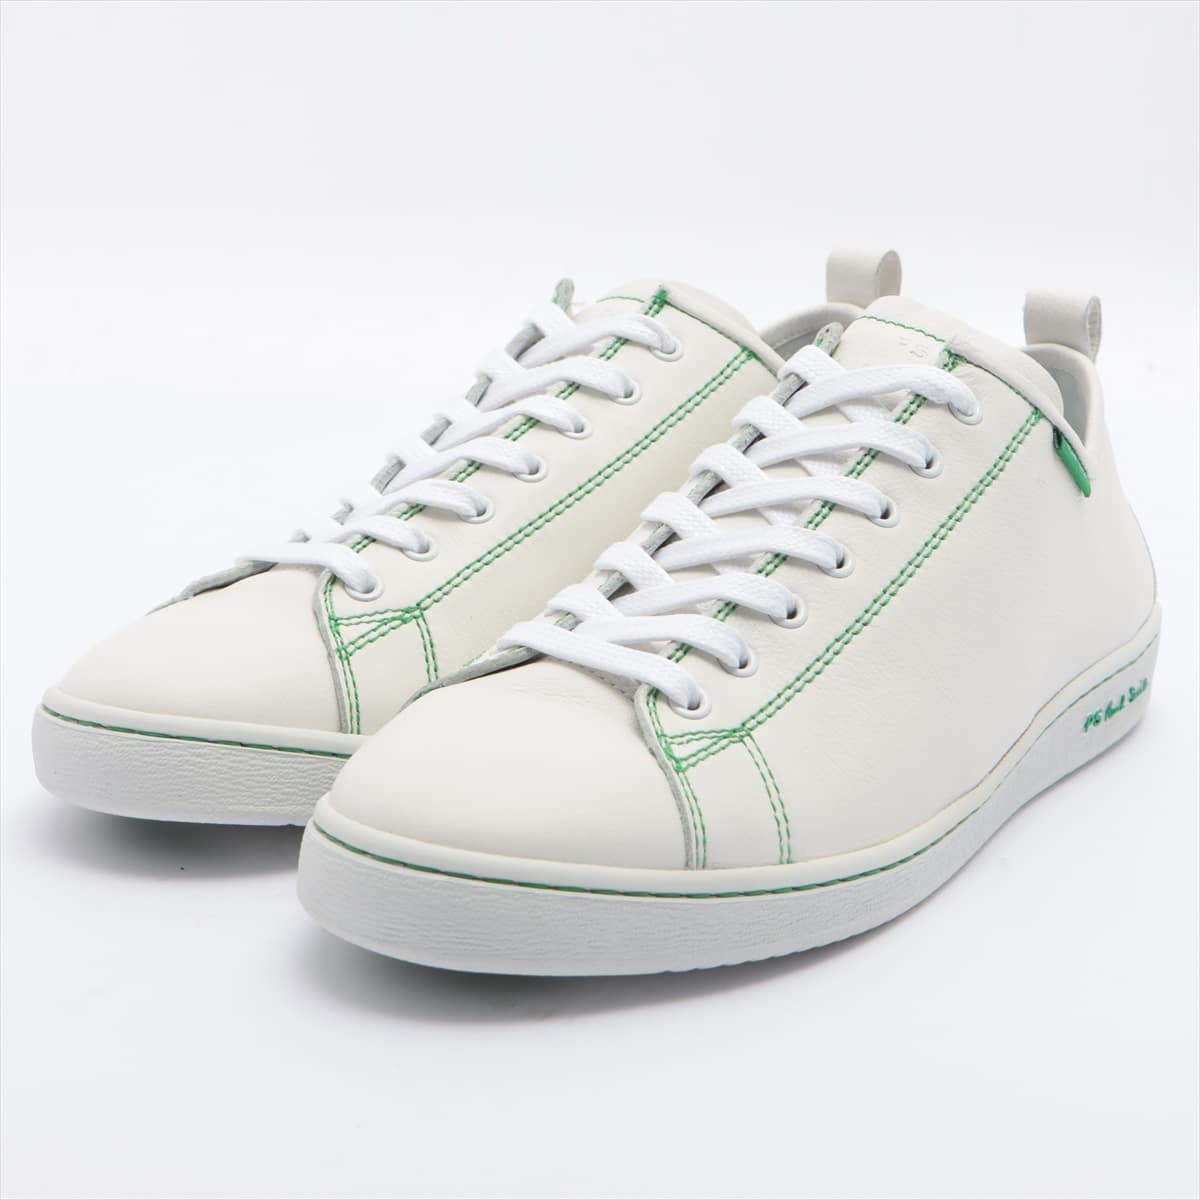 Paul Smith Leather Sneakers 41 Men's White